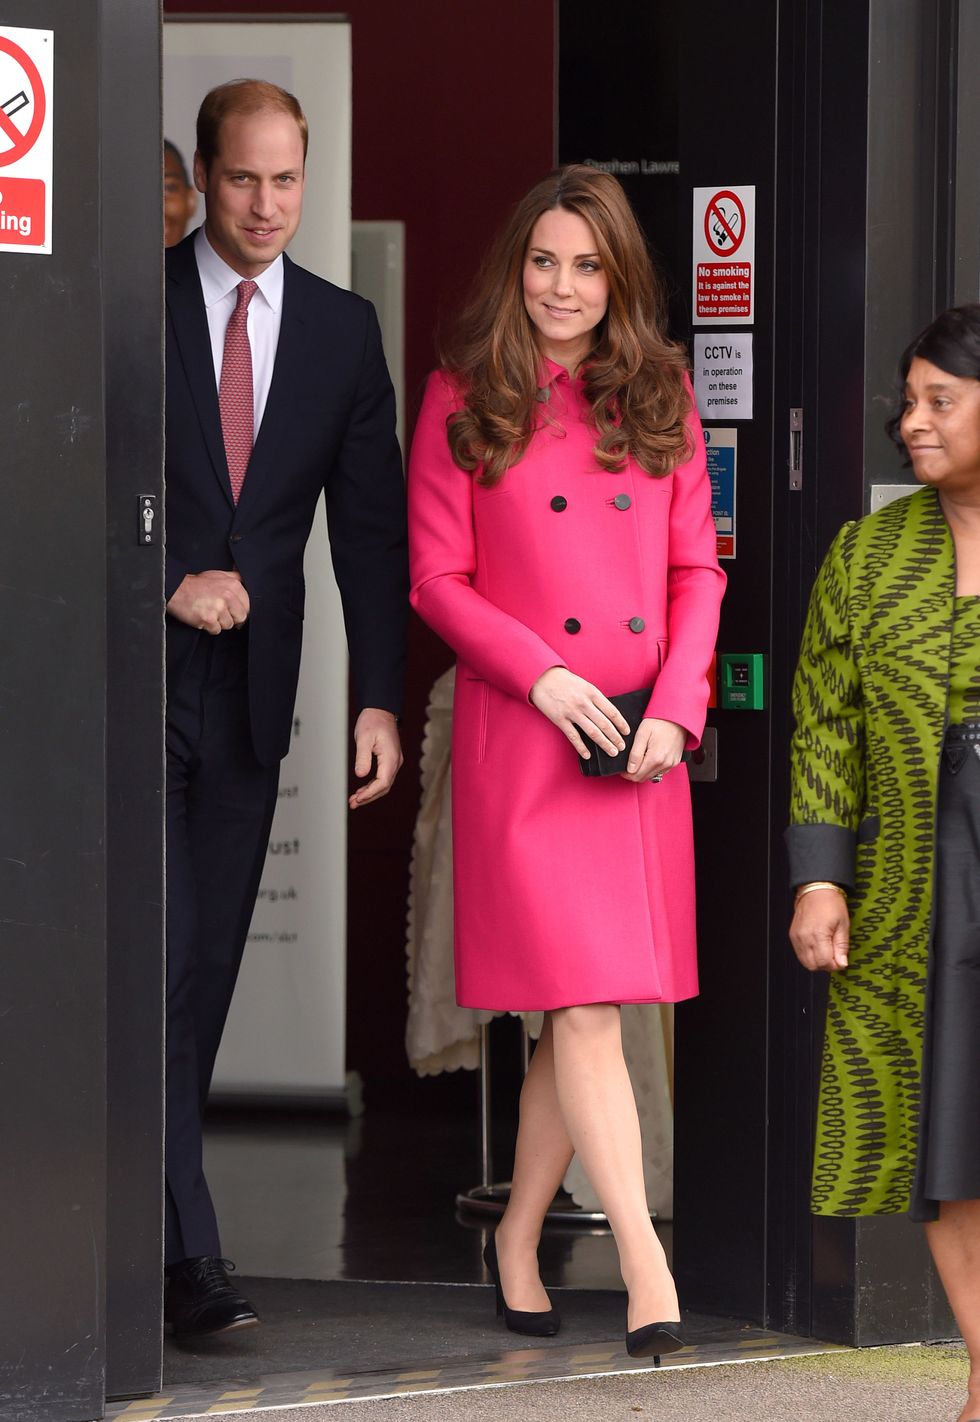 LONDON, ENGLAND - MARCH 27:  Prince William, Duke of Cambridge and Catherine, Duchess of Cambridge visits the Stephen Lawrence Centre, Deptford, to tour the facility and meet Charitable Trust members on March 27, 2015 in London, England.  (Photo by Karwai Tang/WireImage)